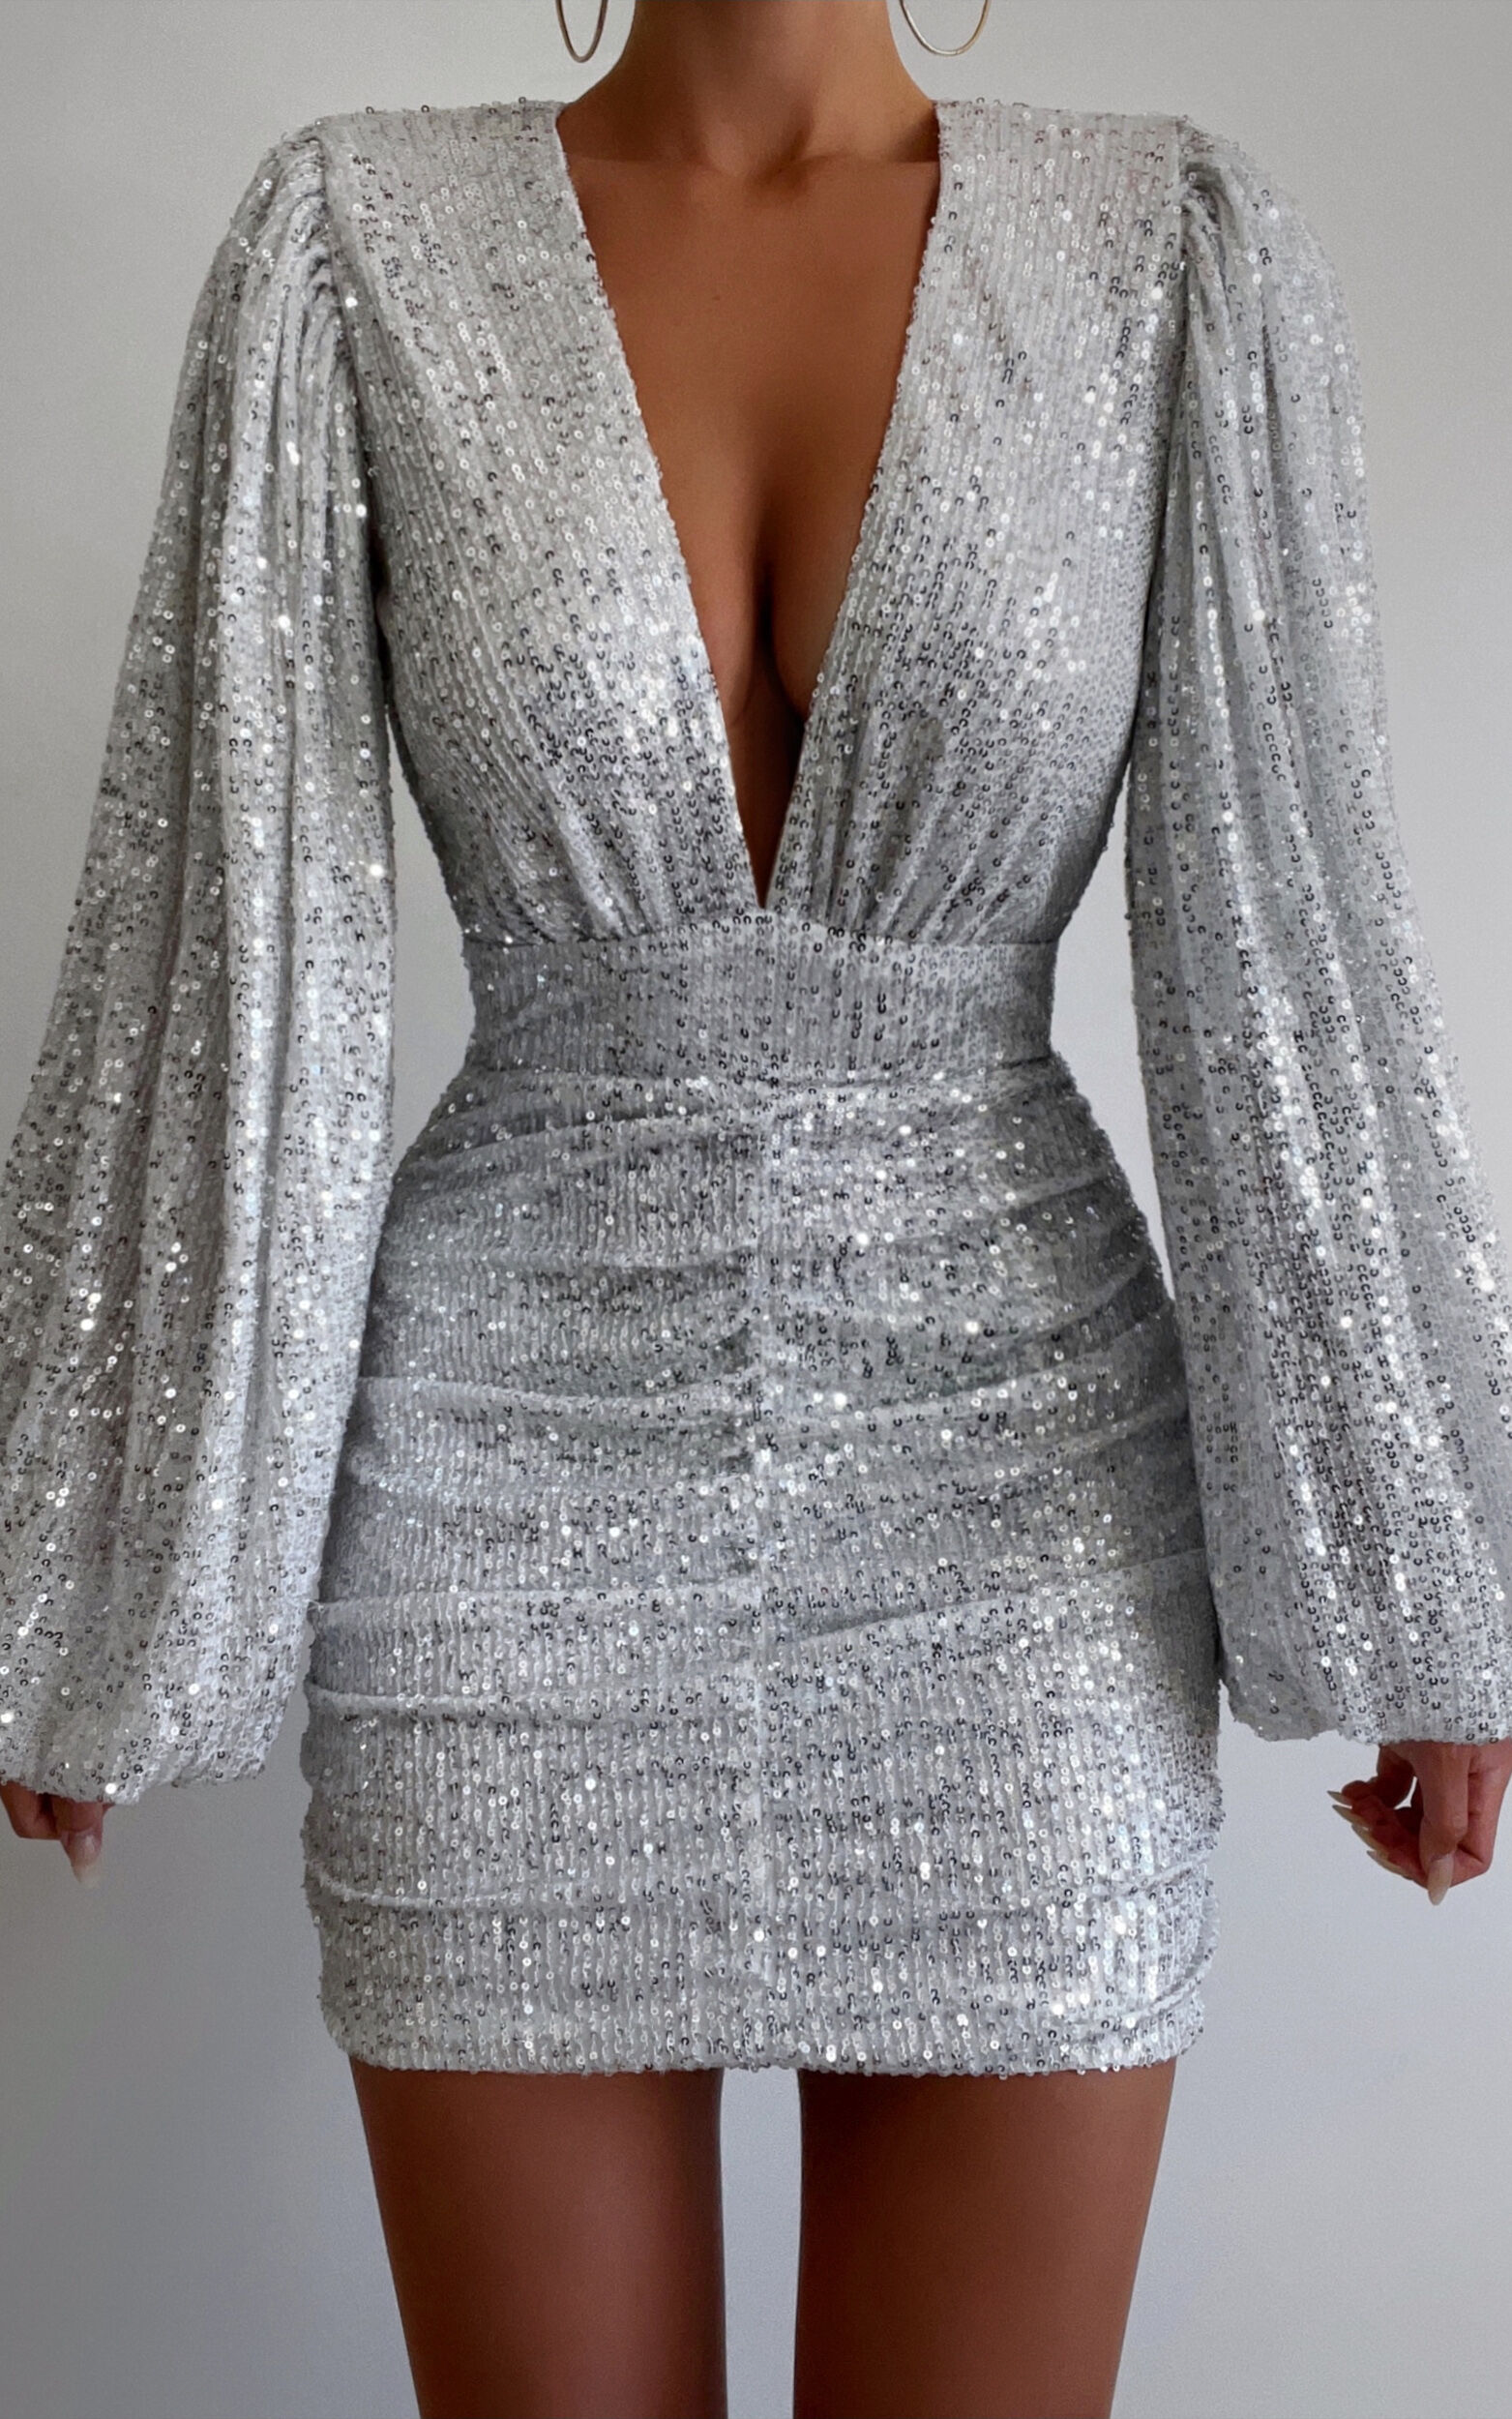 RHYLEE MINI DRESS - LONG SLEEVE RUCHED DRESS IN SILVER SEQUIN